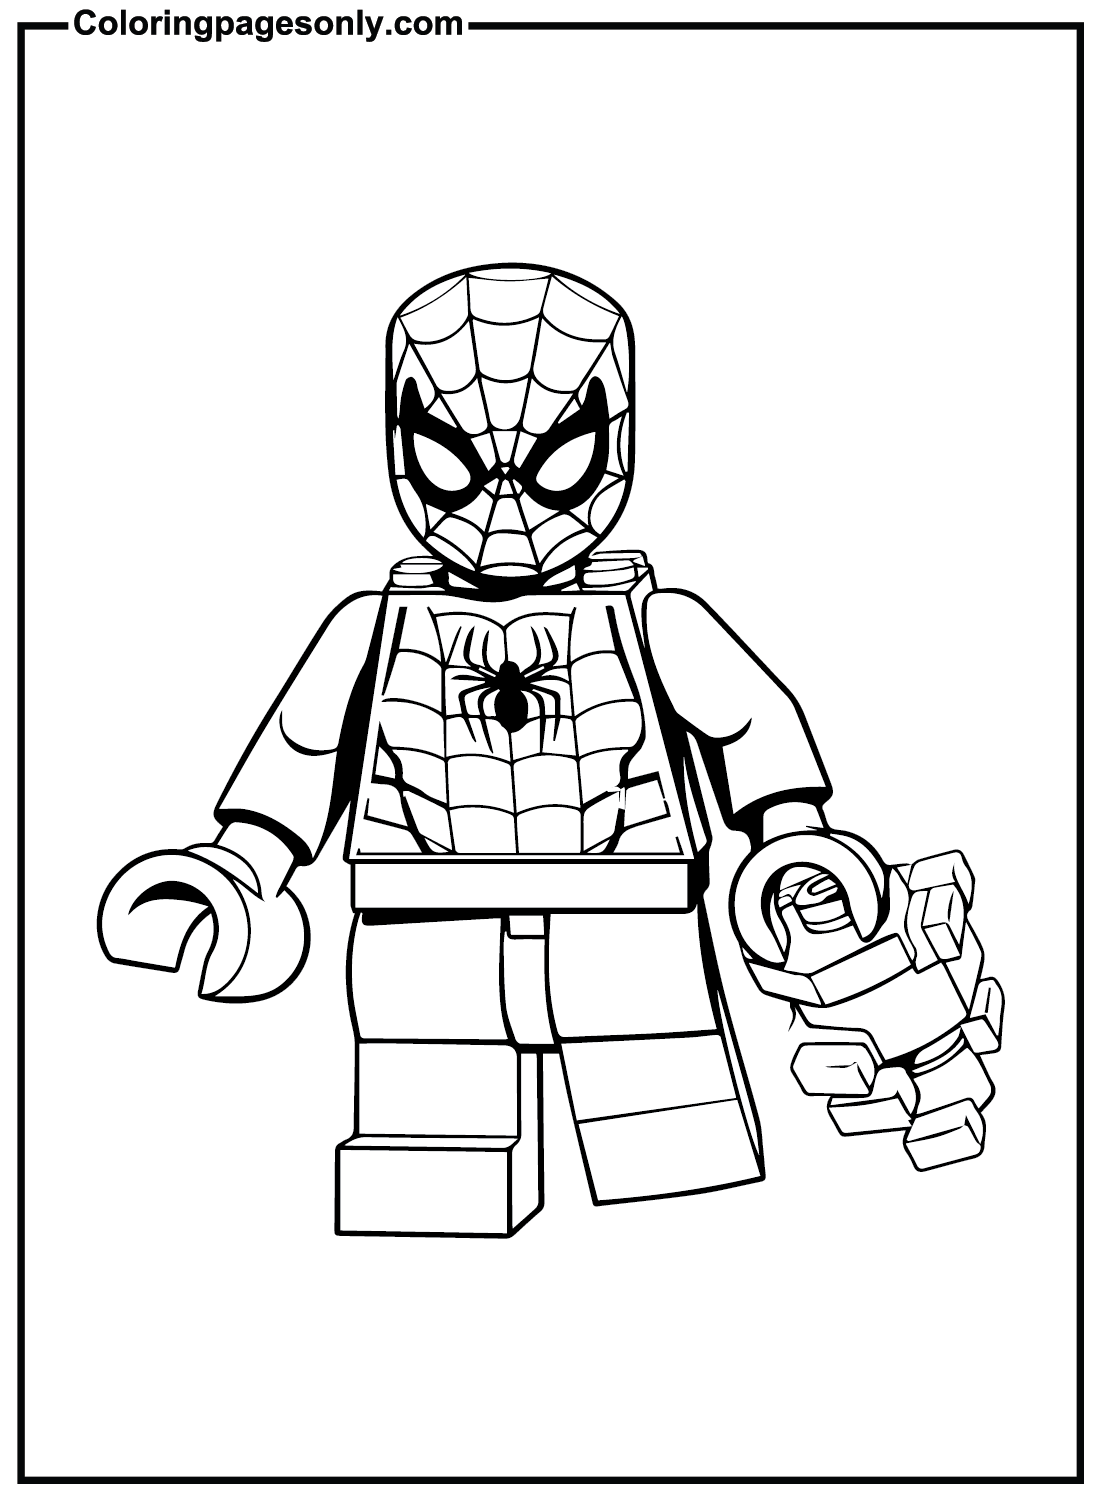 Free Lego Spiderman Coloring Pages - Lego Spiderman Coloring Pages -  Coloring Pages For Kids And Adults